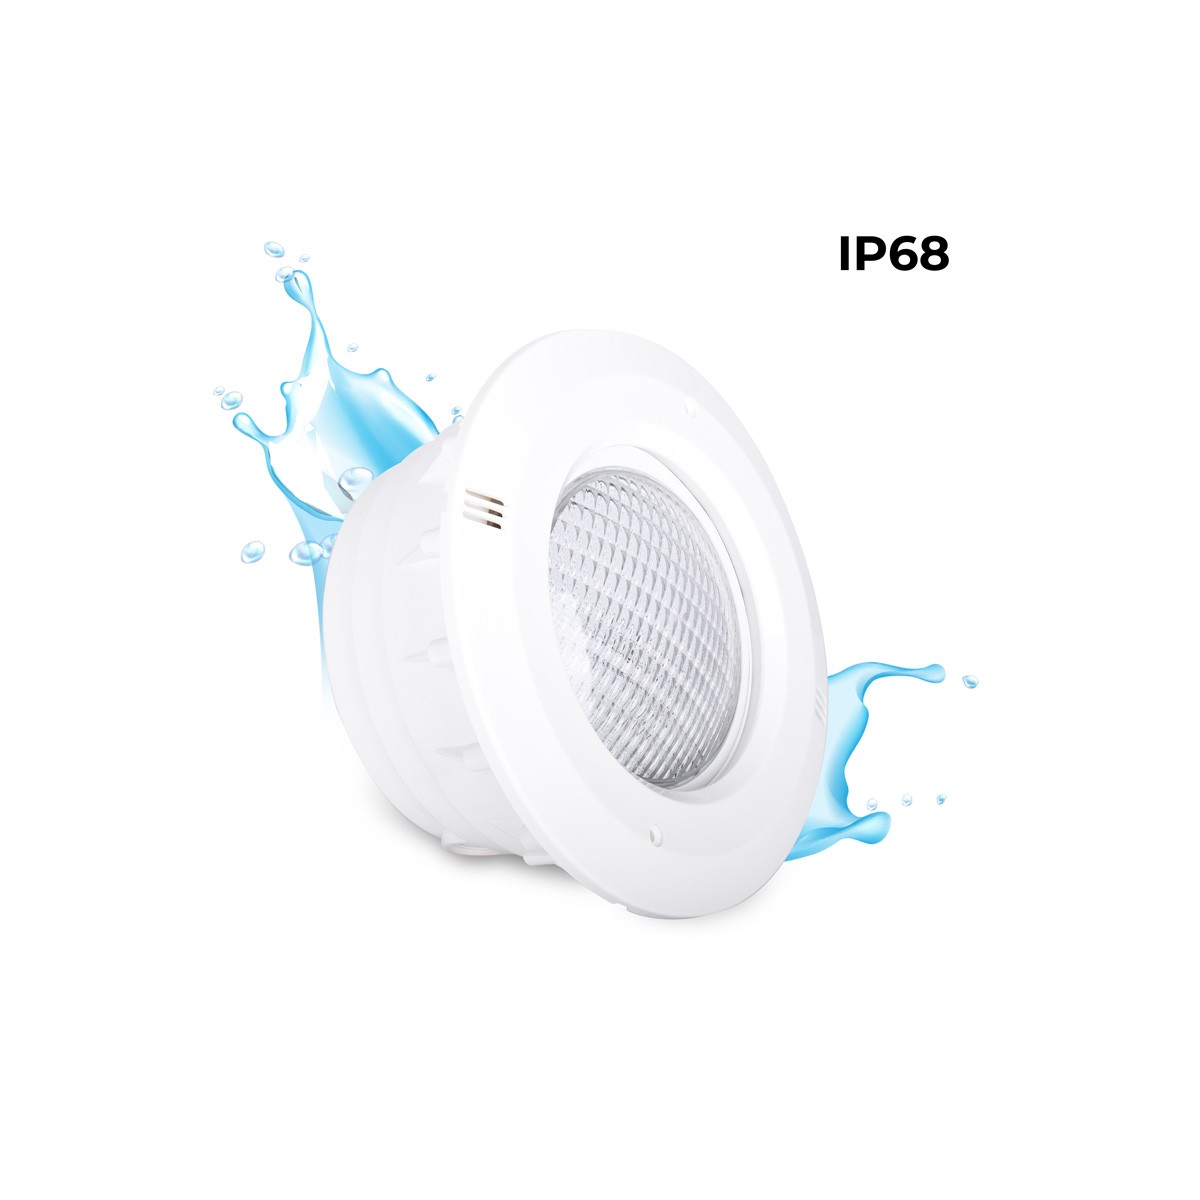 Recessed swimming pool surround for LED PAR56 bulb